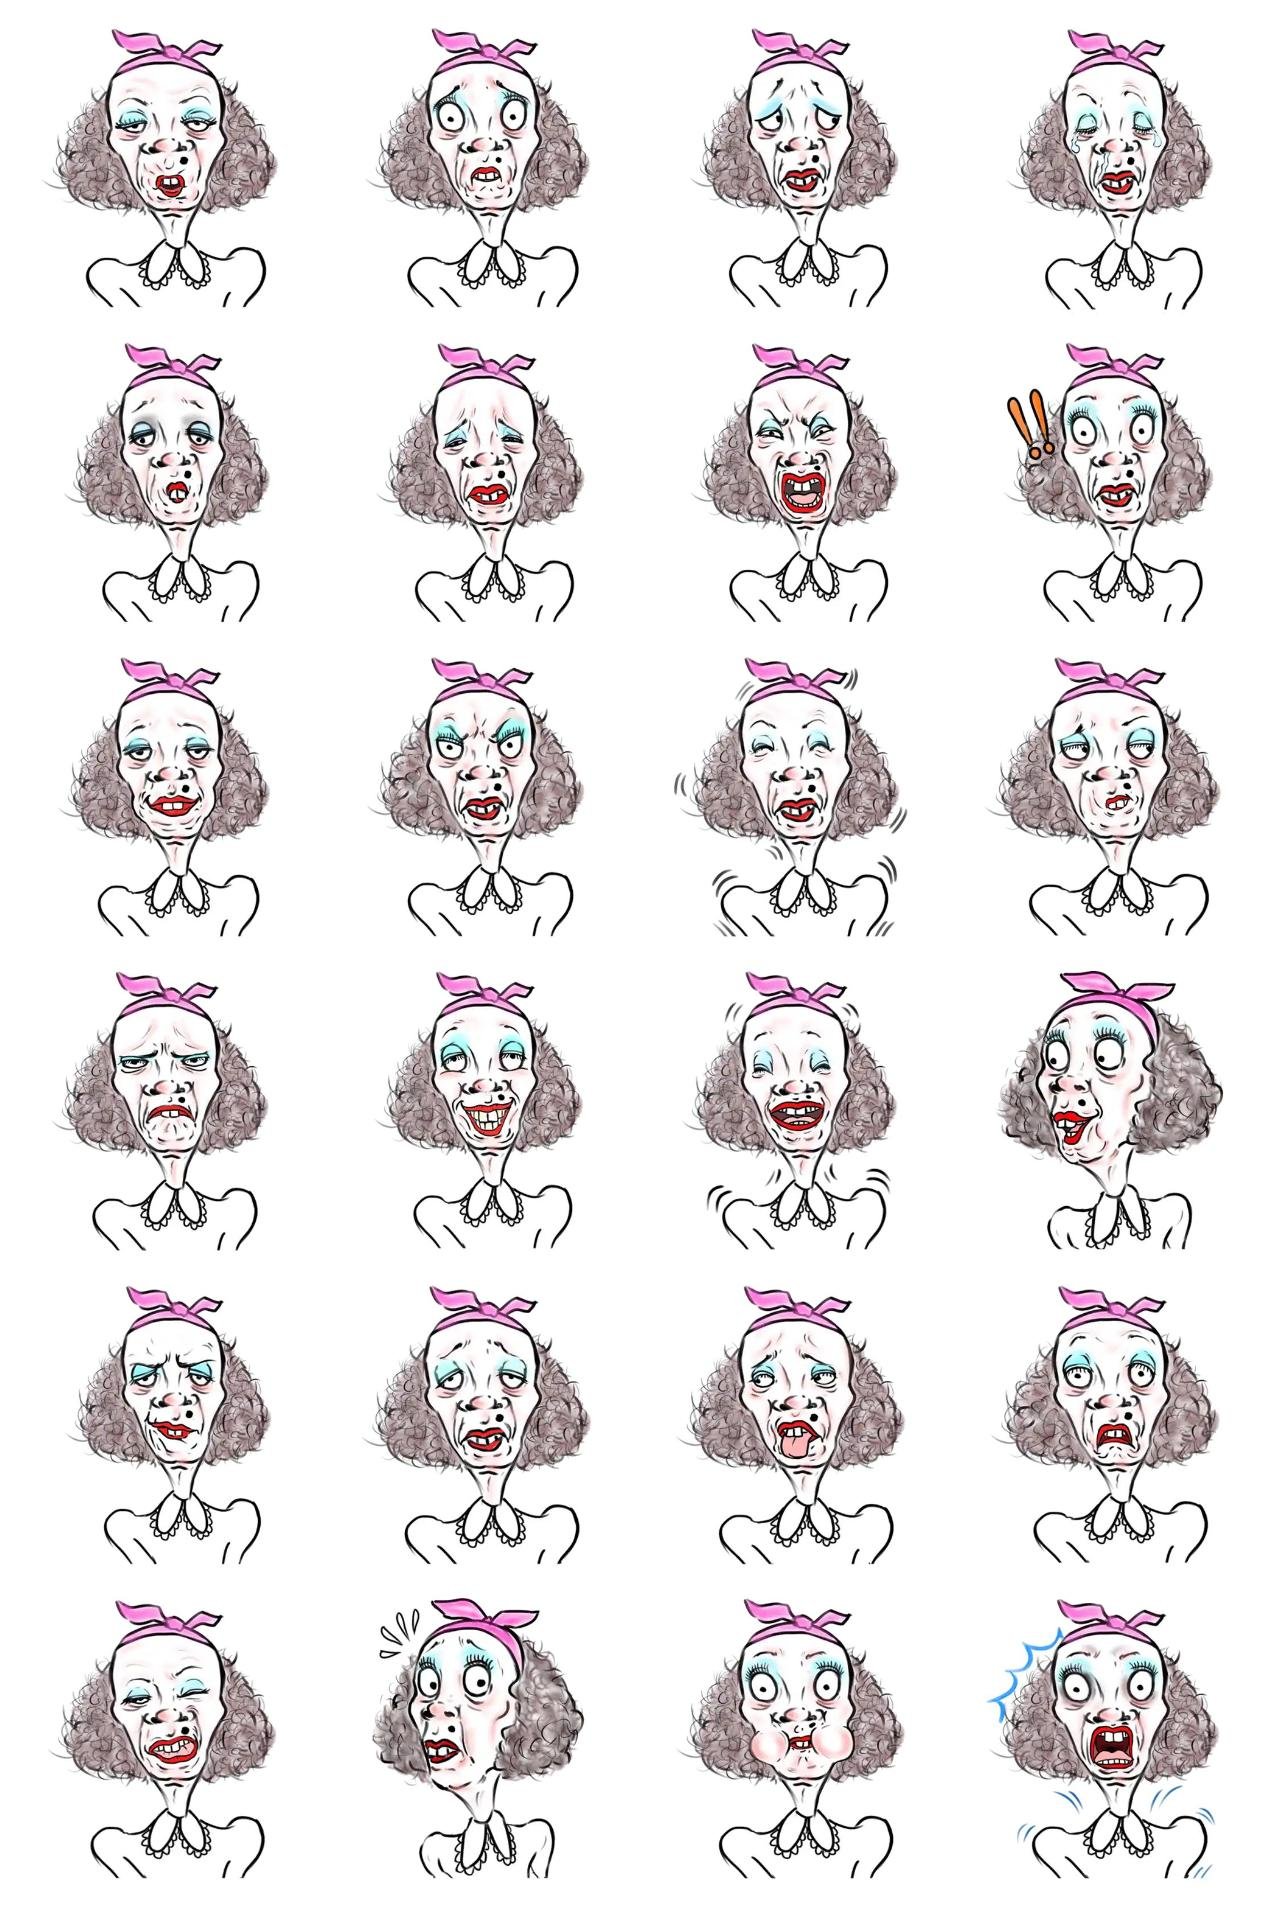 Madame ppuachel People sticker pack for Whatsapp, Telegram, Signal, and others chatting and message apps